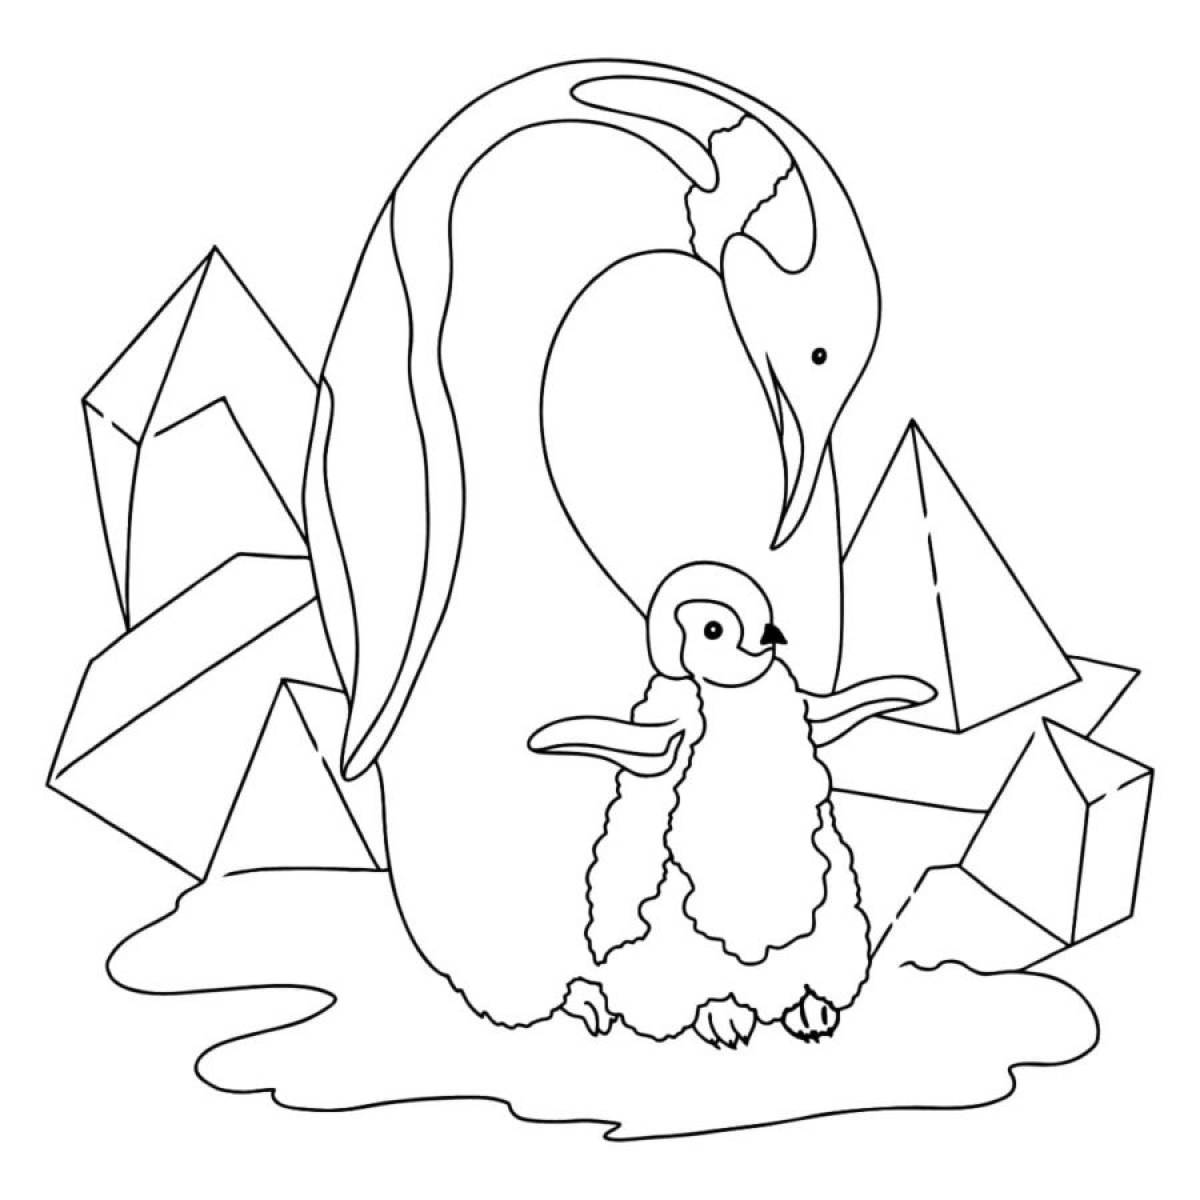 Great penguin coloring book